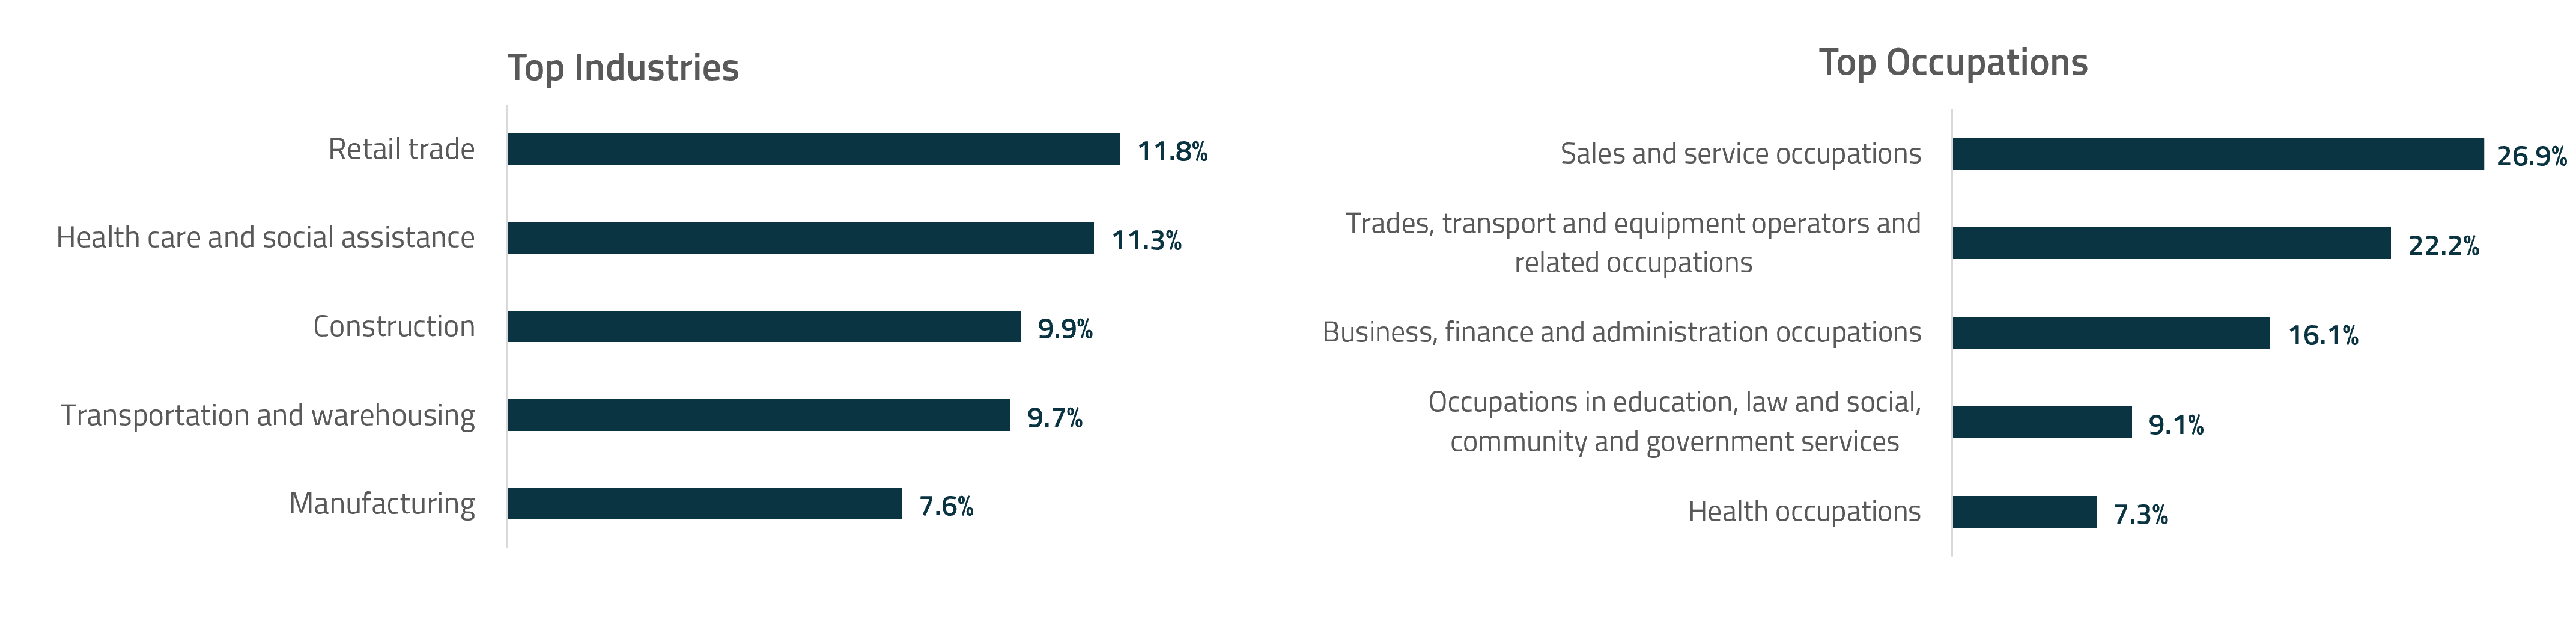 Two graphs depicting the top industries and top occupations in Surrey